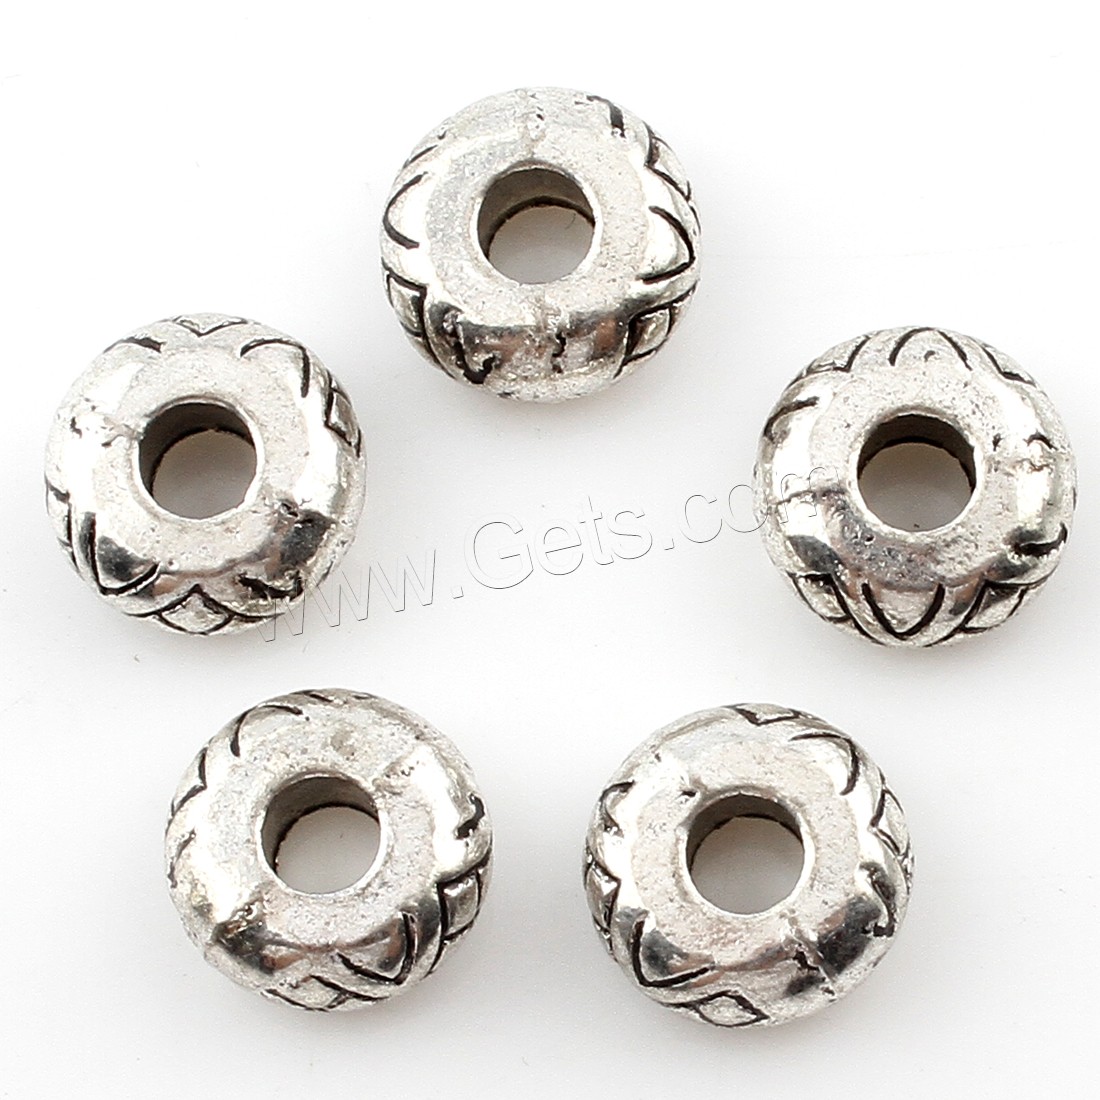 Zinc Alloy Jewelry Beads, plated, more colors for choice, 13x13x6mm, Hole:Approx 4mm, Approx 125PCs/Bag, Sold By Bag